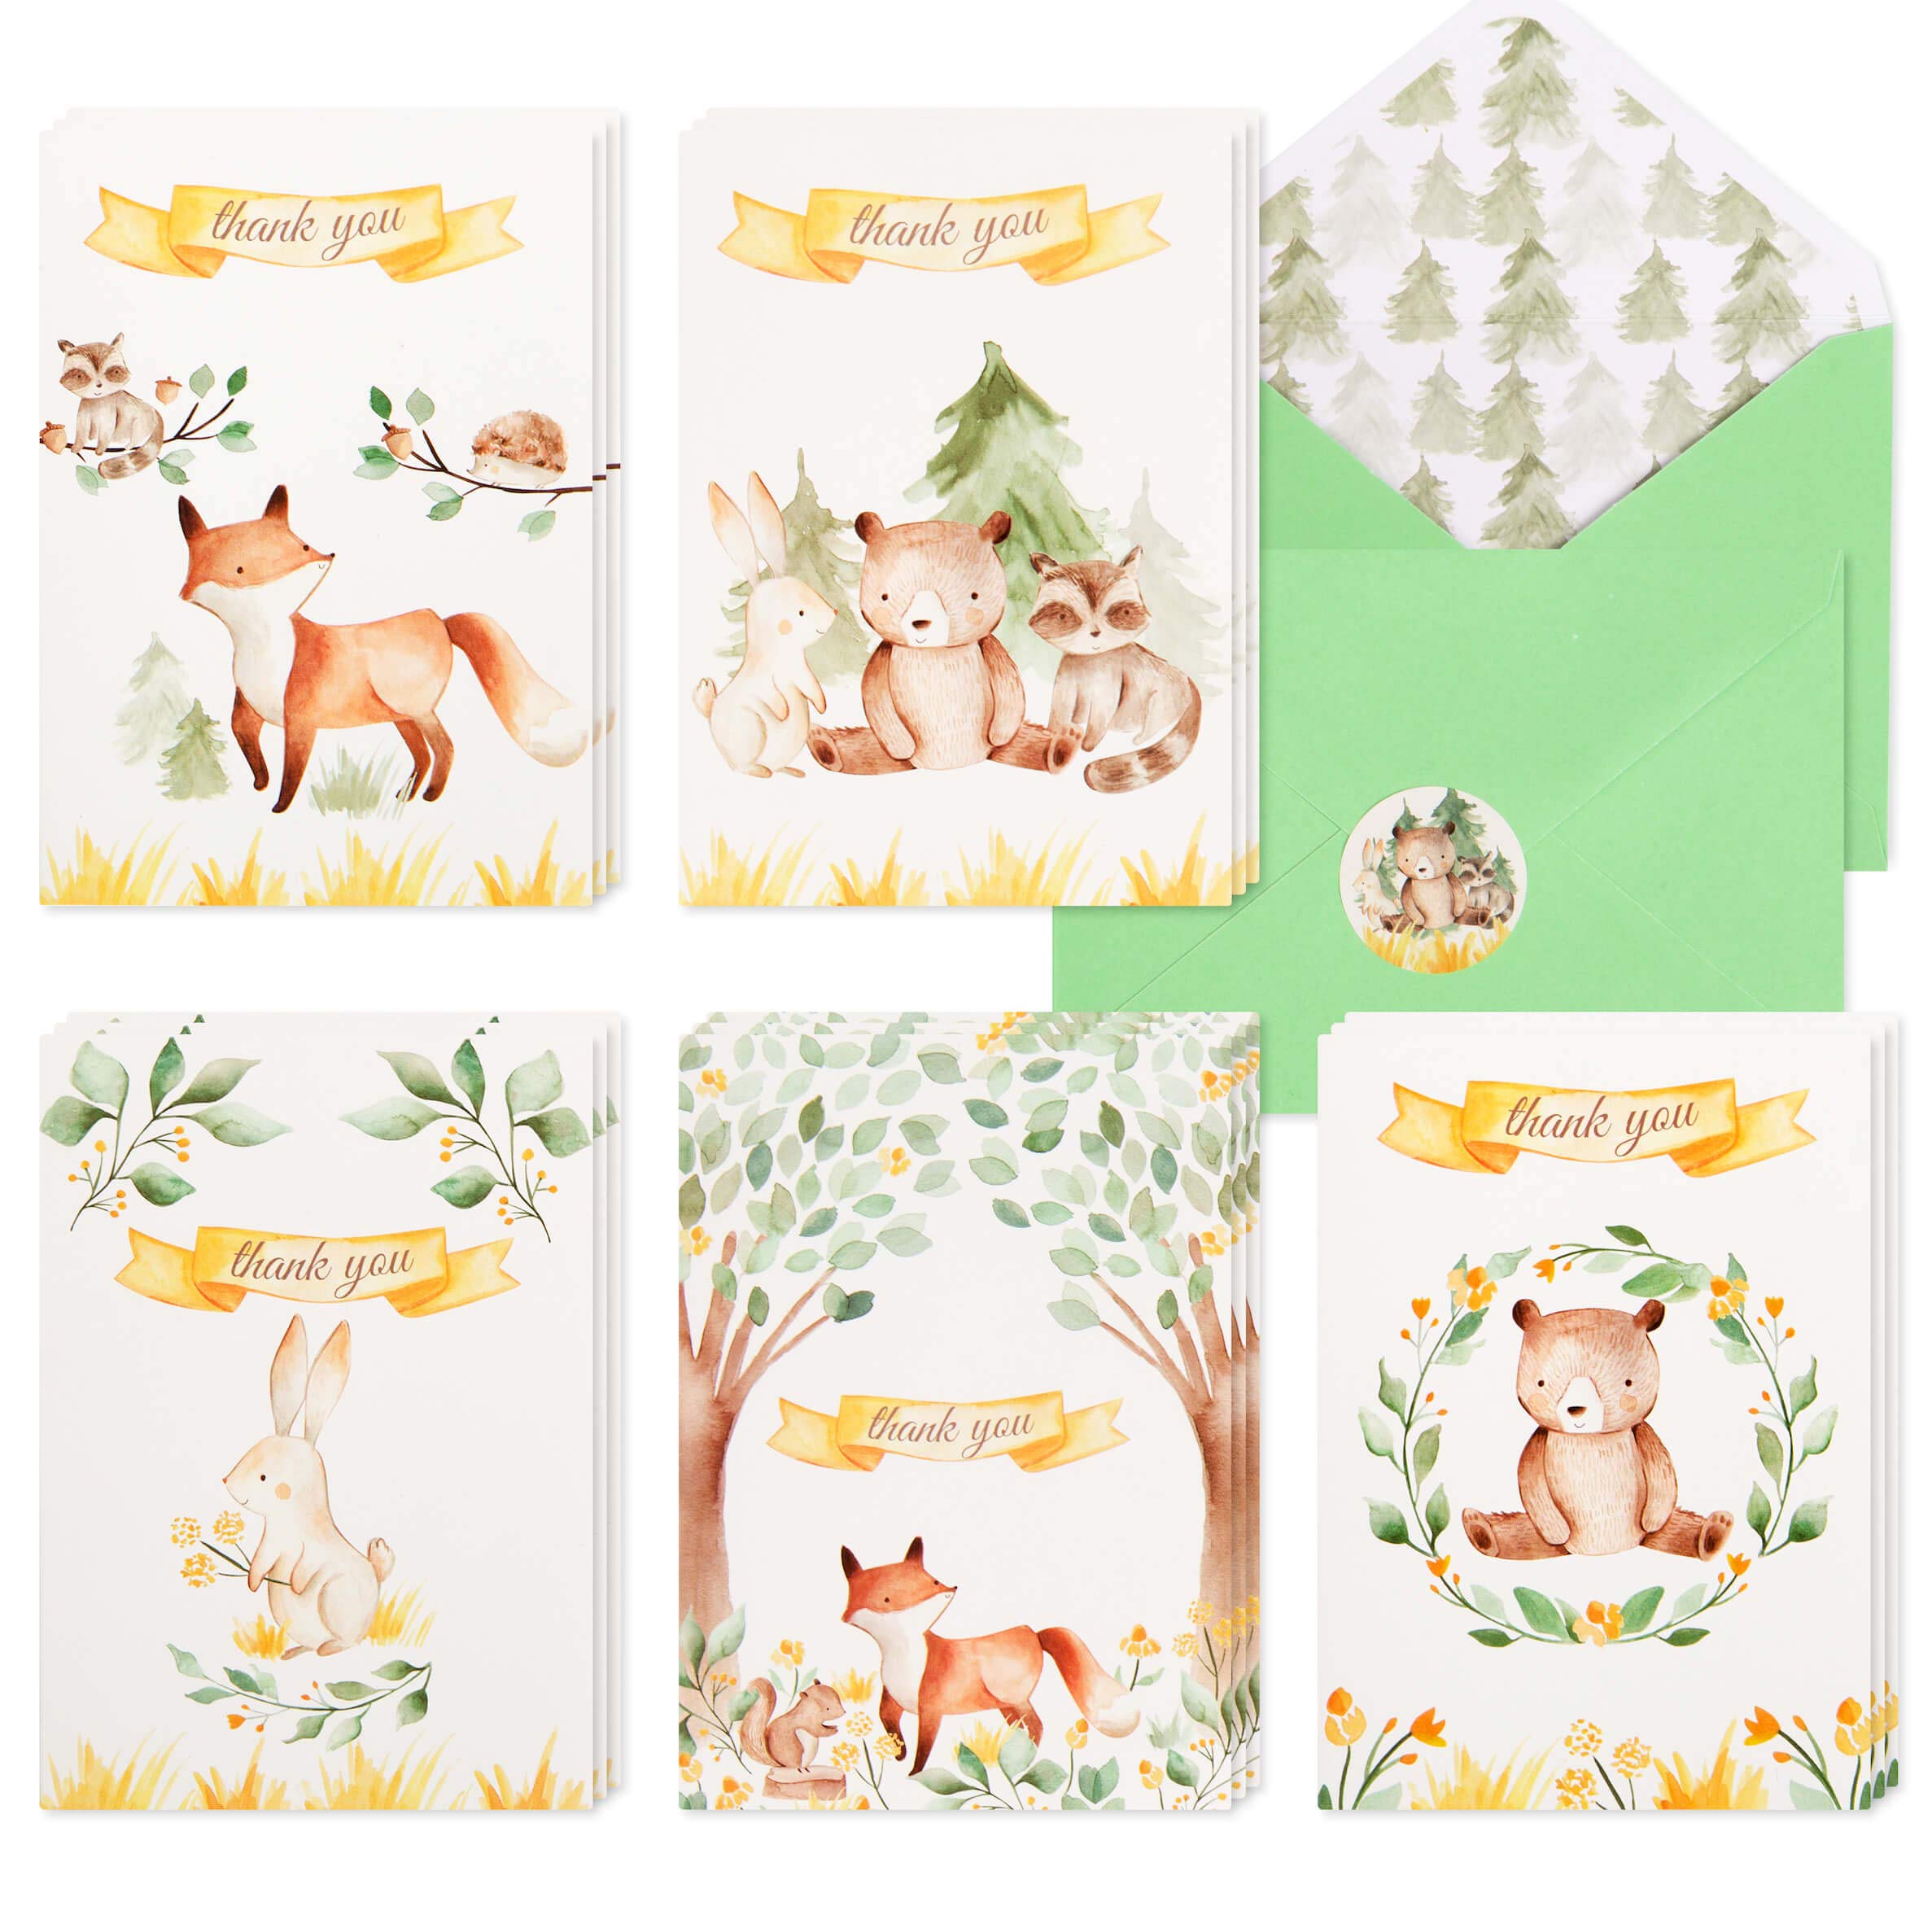 VNS Creations 30 Woodland Thank You Cards | Bulk Forest & Mountain Animals Thank You Notes with Matching Green Envelopes & Stickers | Small & Cute Notecards Perfect for Baby Shower and Kids Birthday.